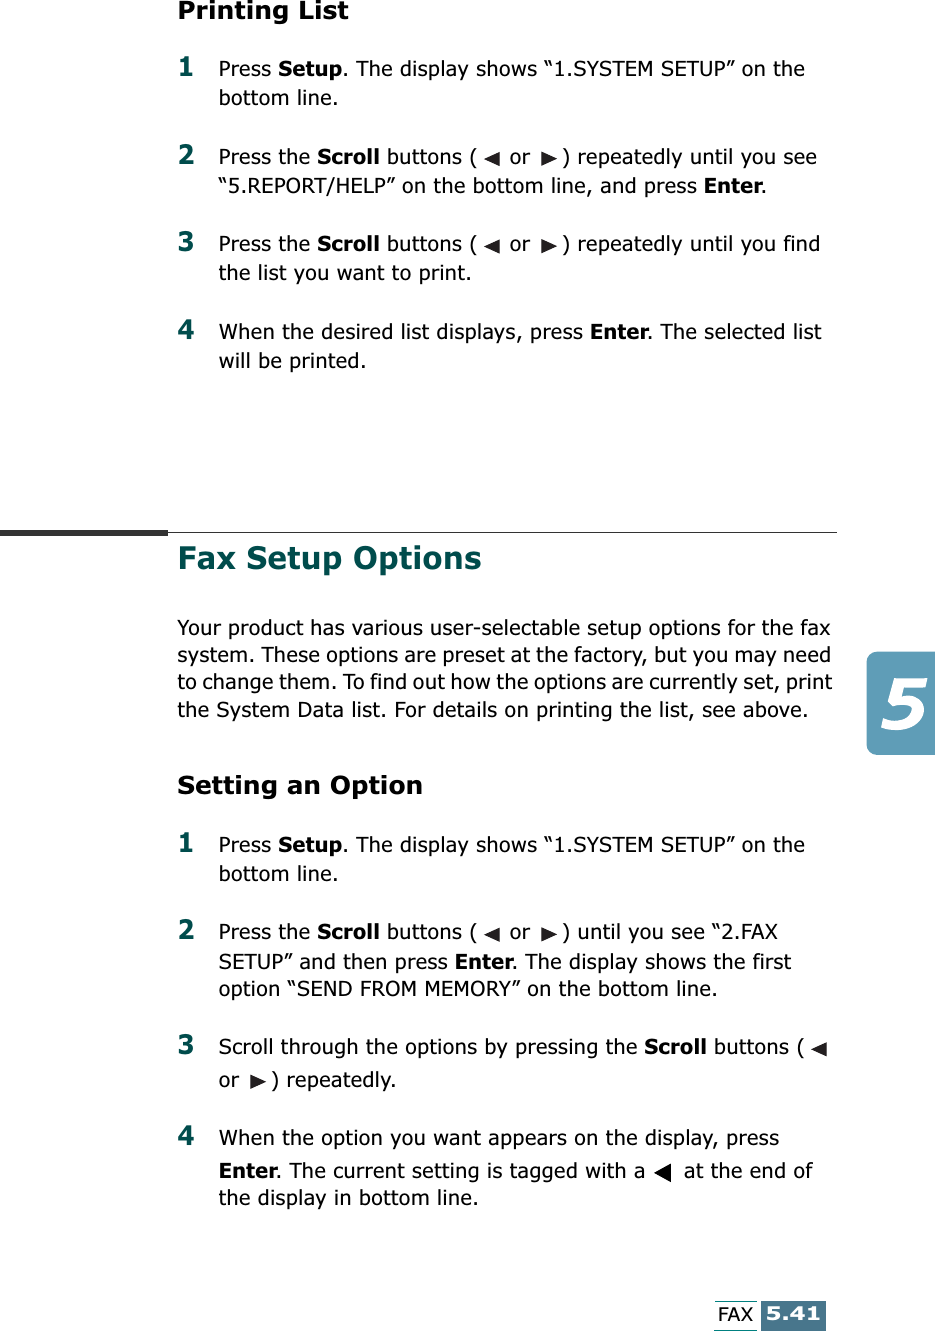 5.41FAXPrinting List1Press Setup. The display shows “1.SYSTEM SETUP” on the bottom line.2Press the Scroll buttons (  or  ) repeatedly until you see “5.REPORT/HELP” on the bottom line, and press Enter.3Press the Scroll buttons (  or  ) repeatedly until you find the list you want to print. 4When the desired list displays, press Enter. The selected list will be printed.Fax Setup OptionsYour product has various user-selectable setup options for the fax system. These options are preset at the factory, but you may need to change them. To find out how the options are currently set, print the System Data list. For details on printing the list, see above.Setting an Option1Press Setup. The display shows “1.SYSTEM SETUP” on the bottom line.2Press the Scroll buttons (  or  ) until you see “2.FAX SETUP” and then press Enter. The display shows the first option “SEND FROM MEMORY” on the bottom line.3Scroll through the options by pressing the Scroll buttons (  or  ) repeatedly.4When the option you want appears on the display, press Enter. The current setting is tagged with a   at the end of the display in bottom line.